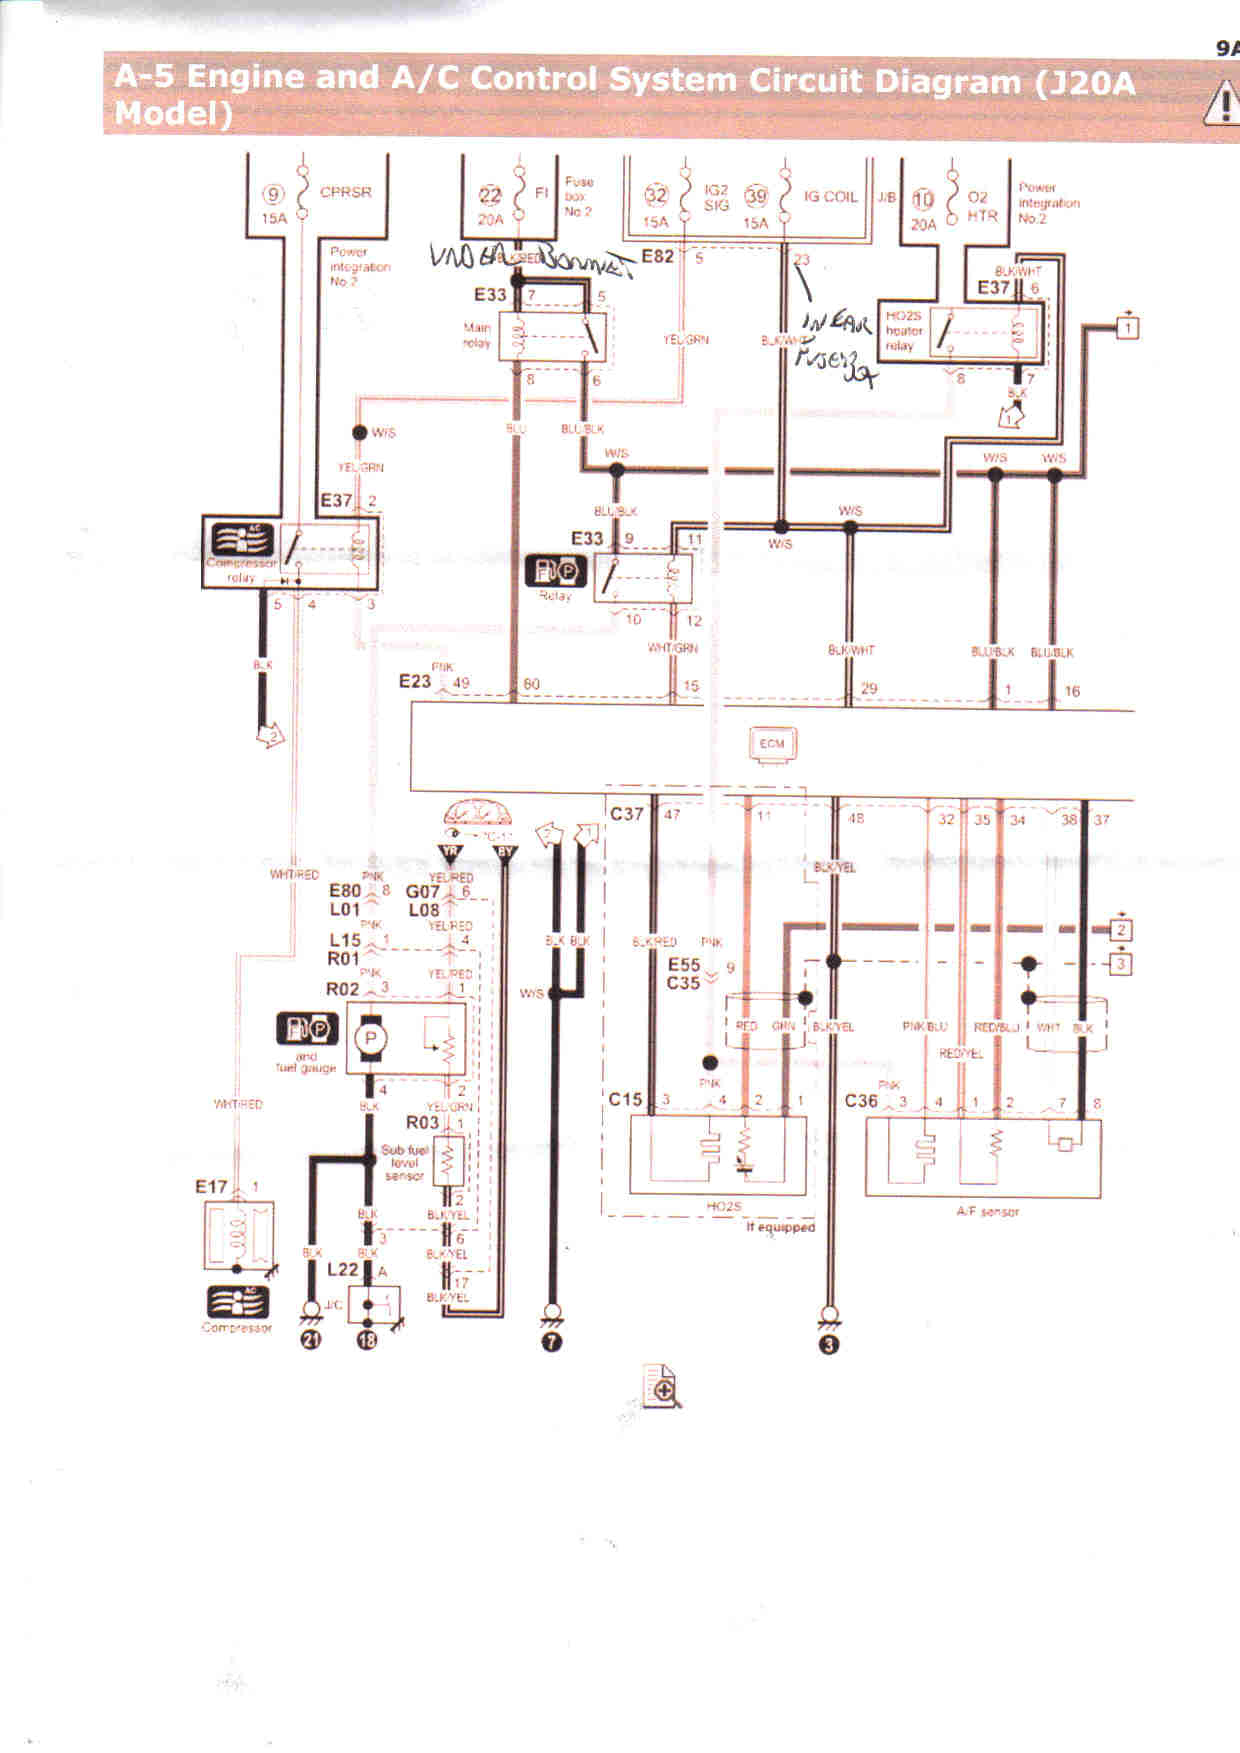 southport wiring diagram